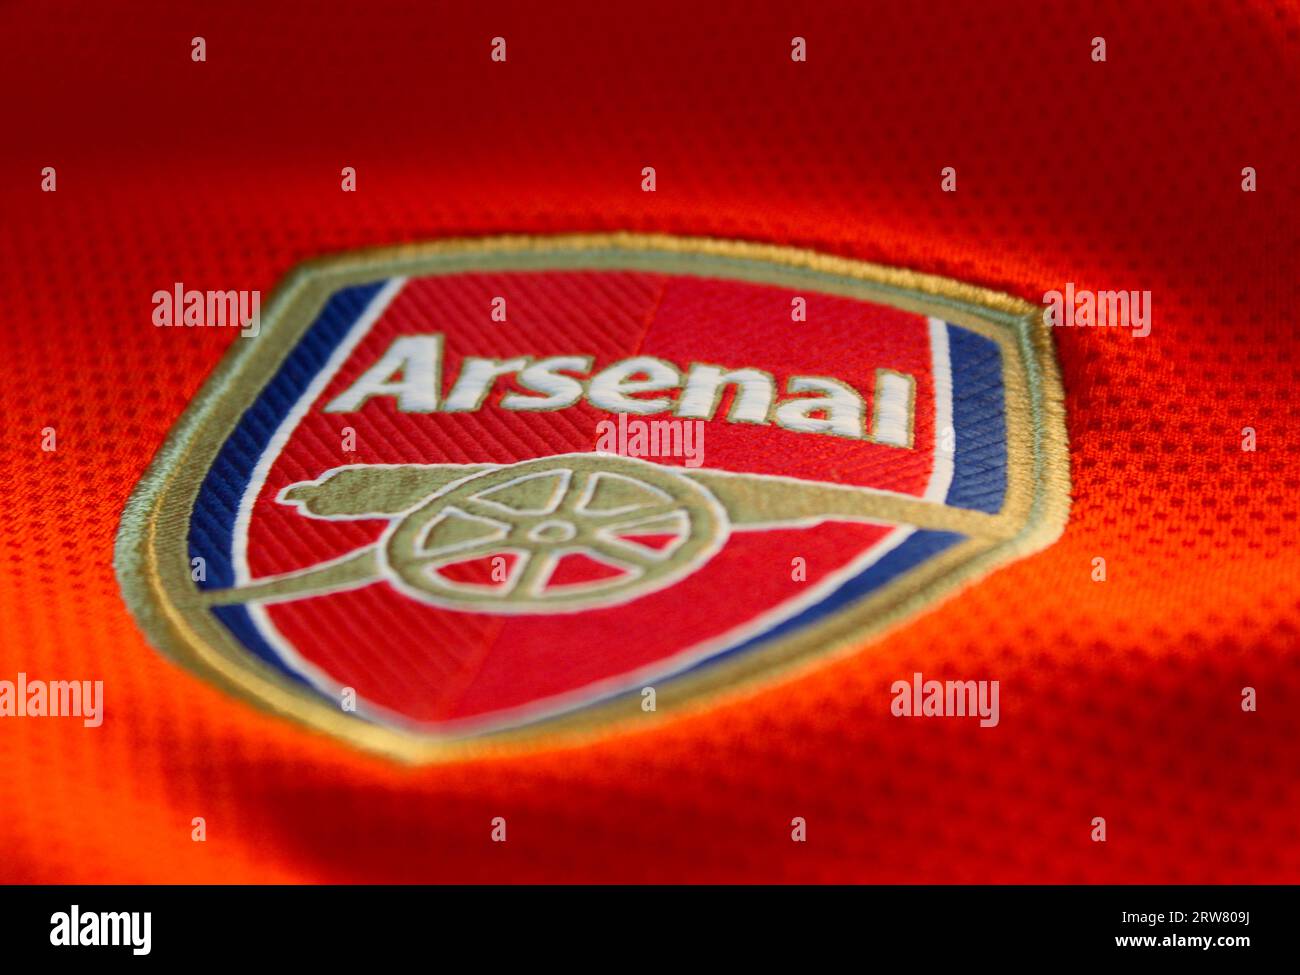 A photo of the red and white Arsenal Football Club t-shirt and badge. Stock Photo